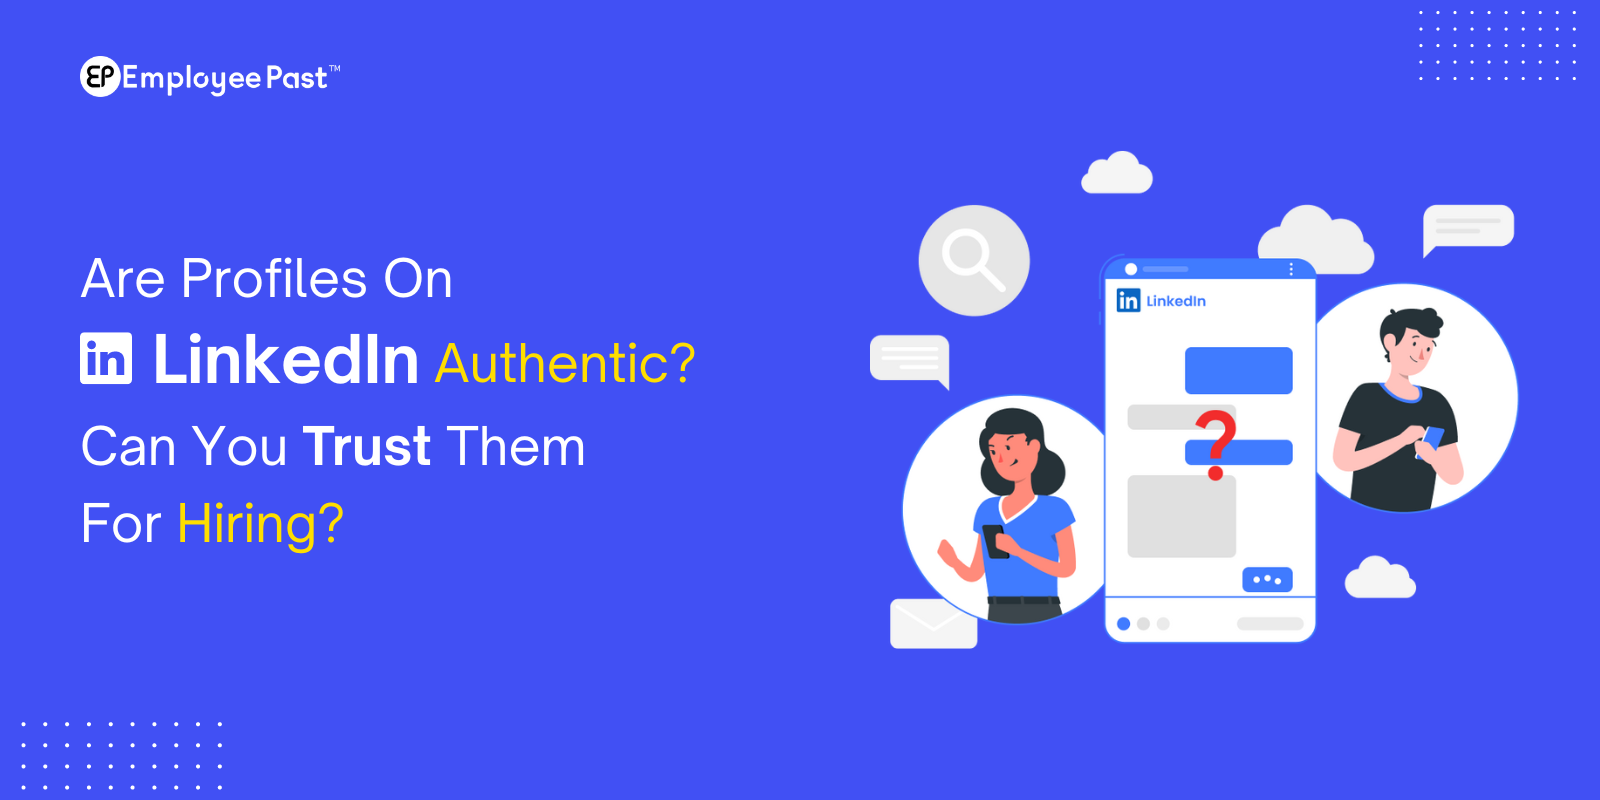 Are profiles on LinkedIn authentic? Can you trust them for hiring?